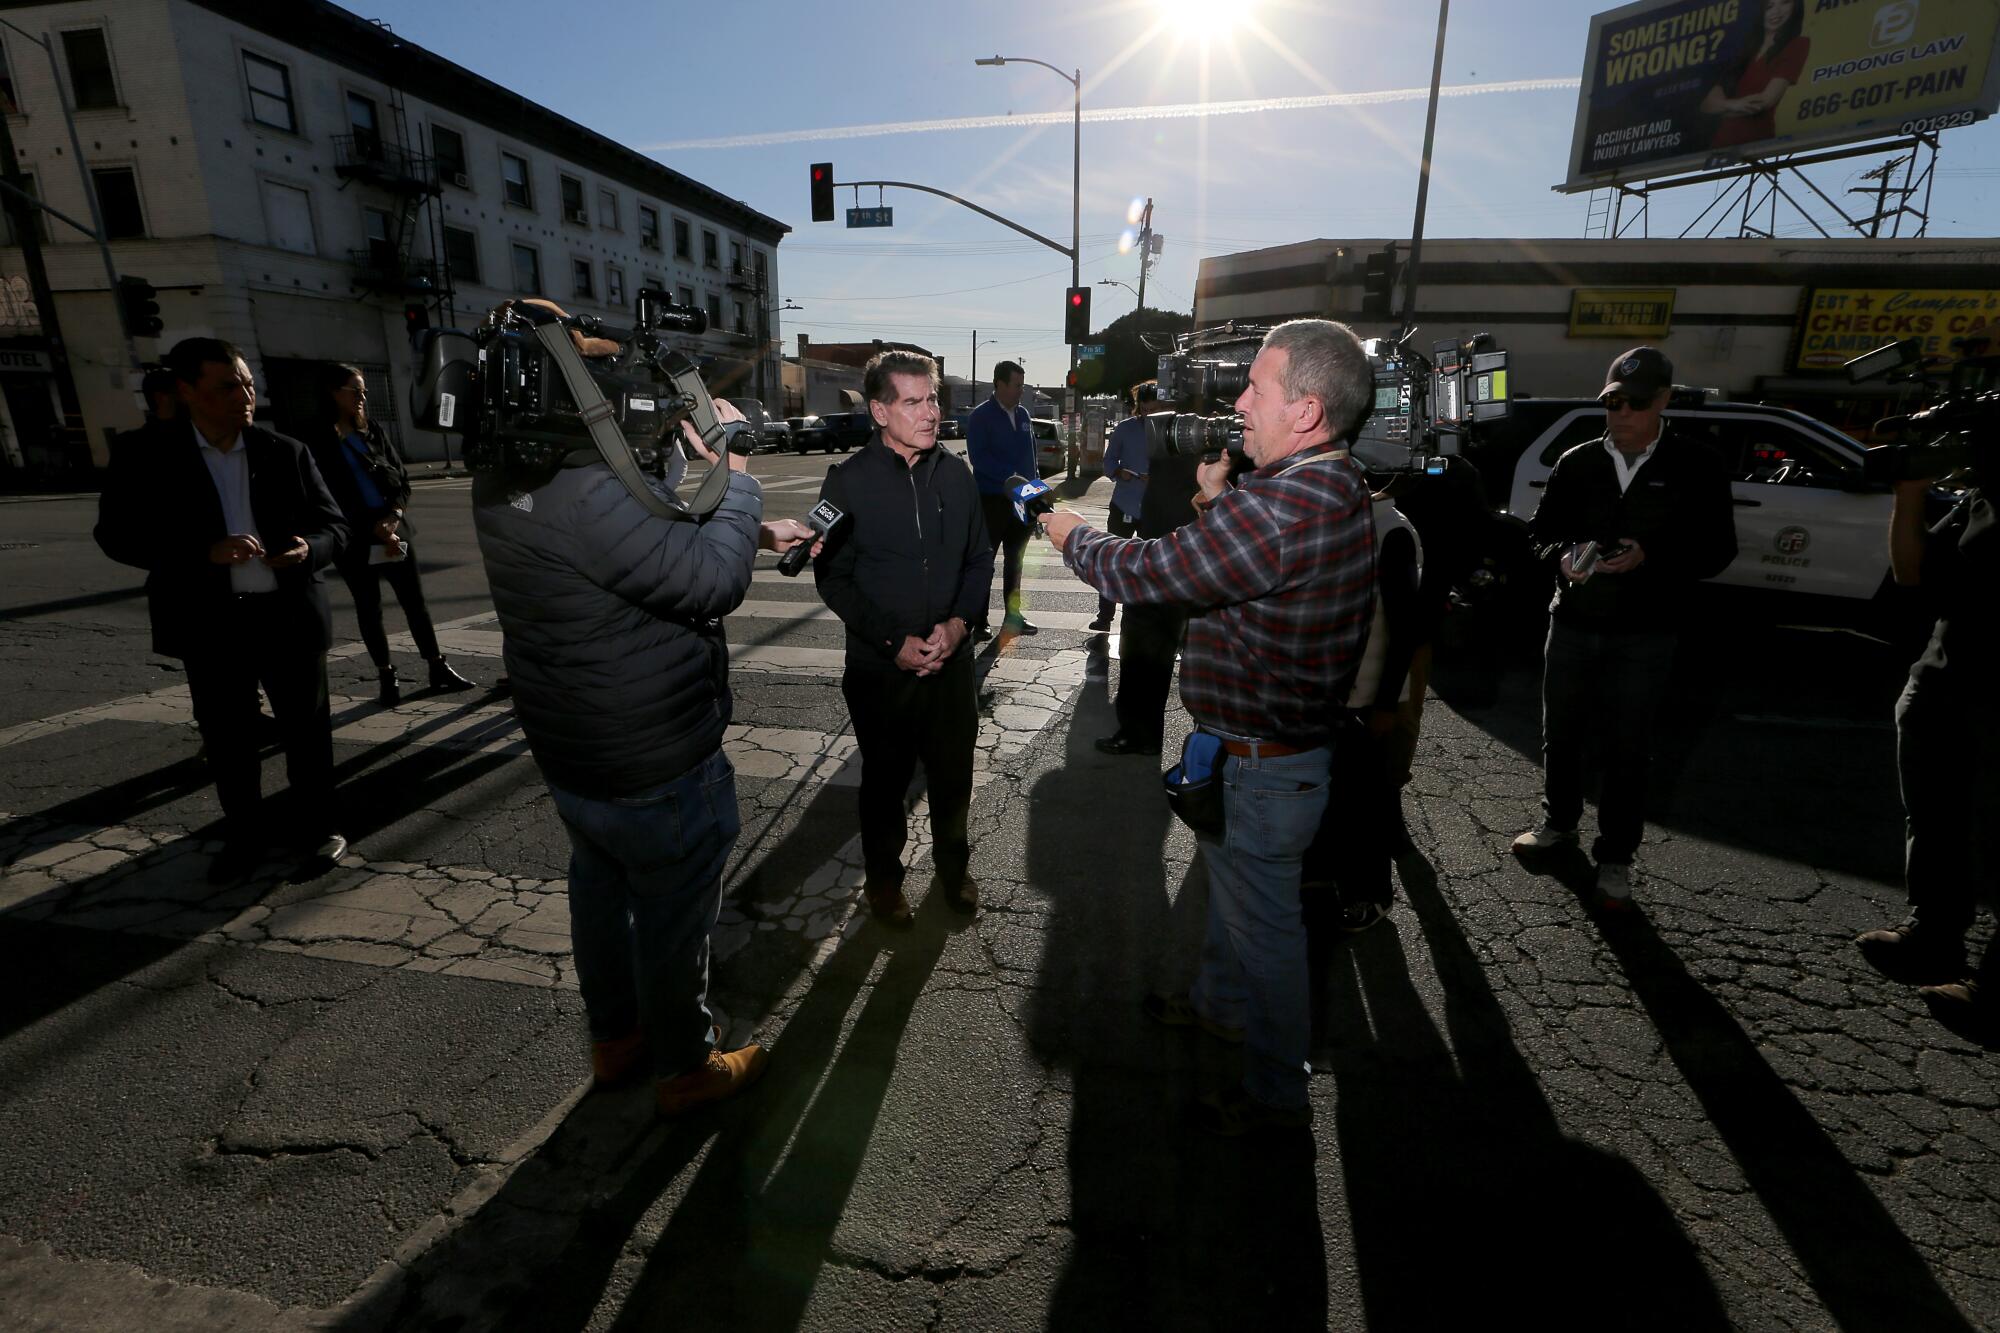 News cameras follow Dodgers great Steve Garvey during his visit to Skid Row in Los Angeles.